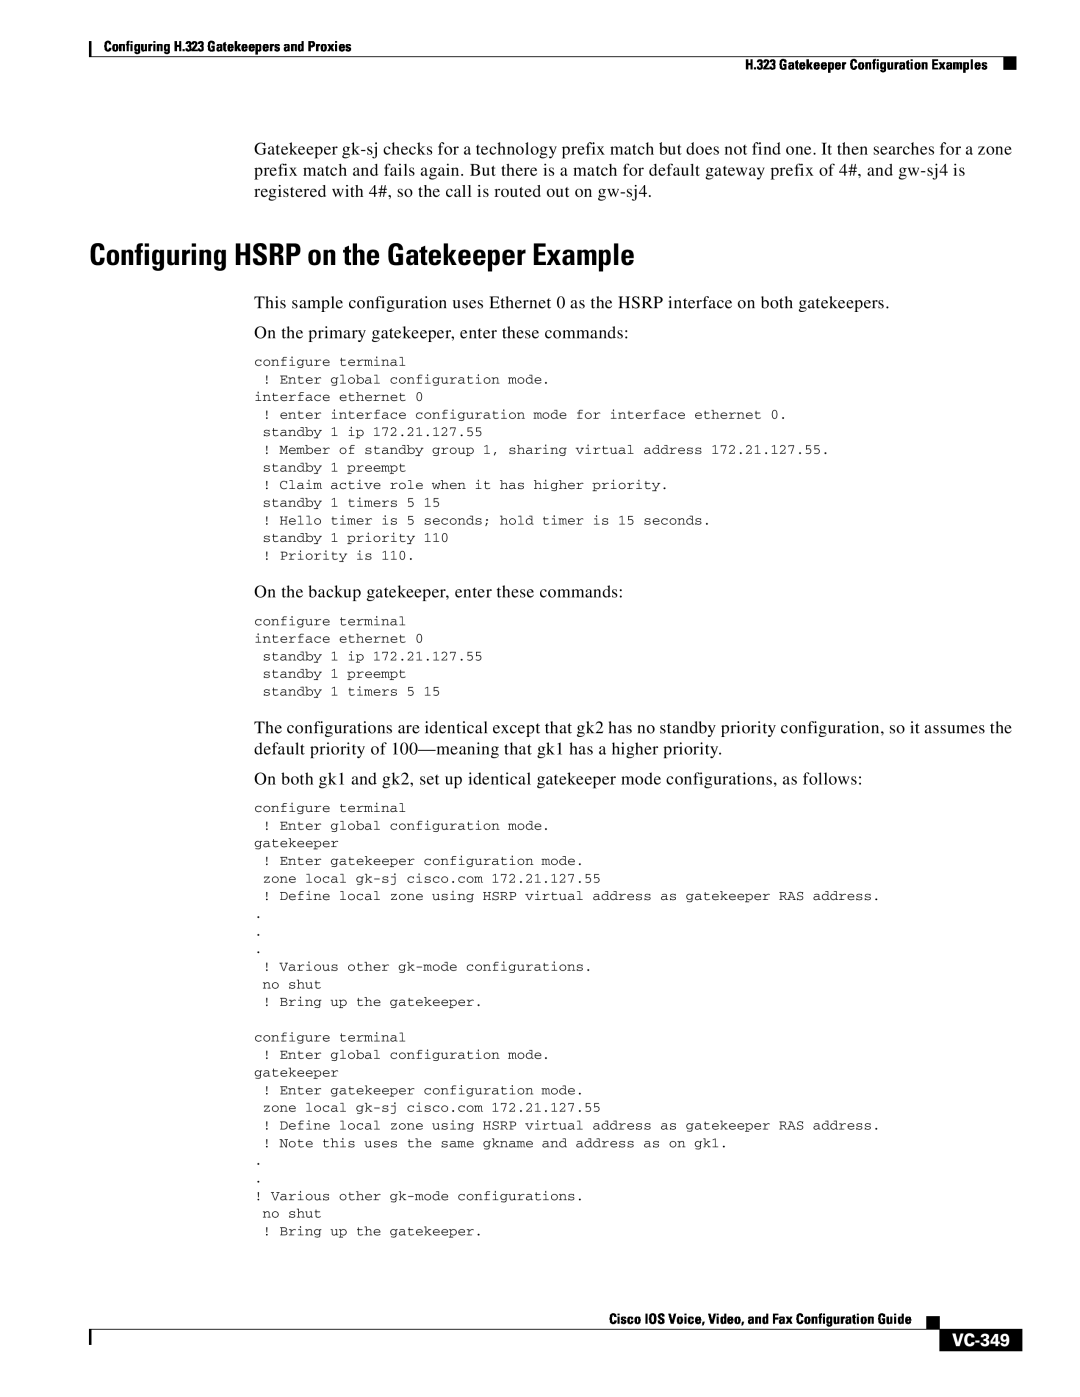 Cisco Systems VC-289 manual Configuring HSRP on the Gatekeeper Example, VC-349 